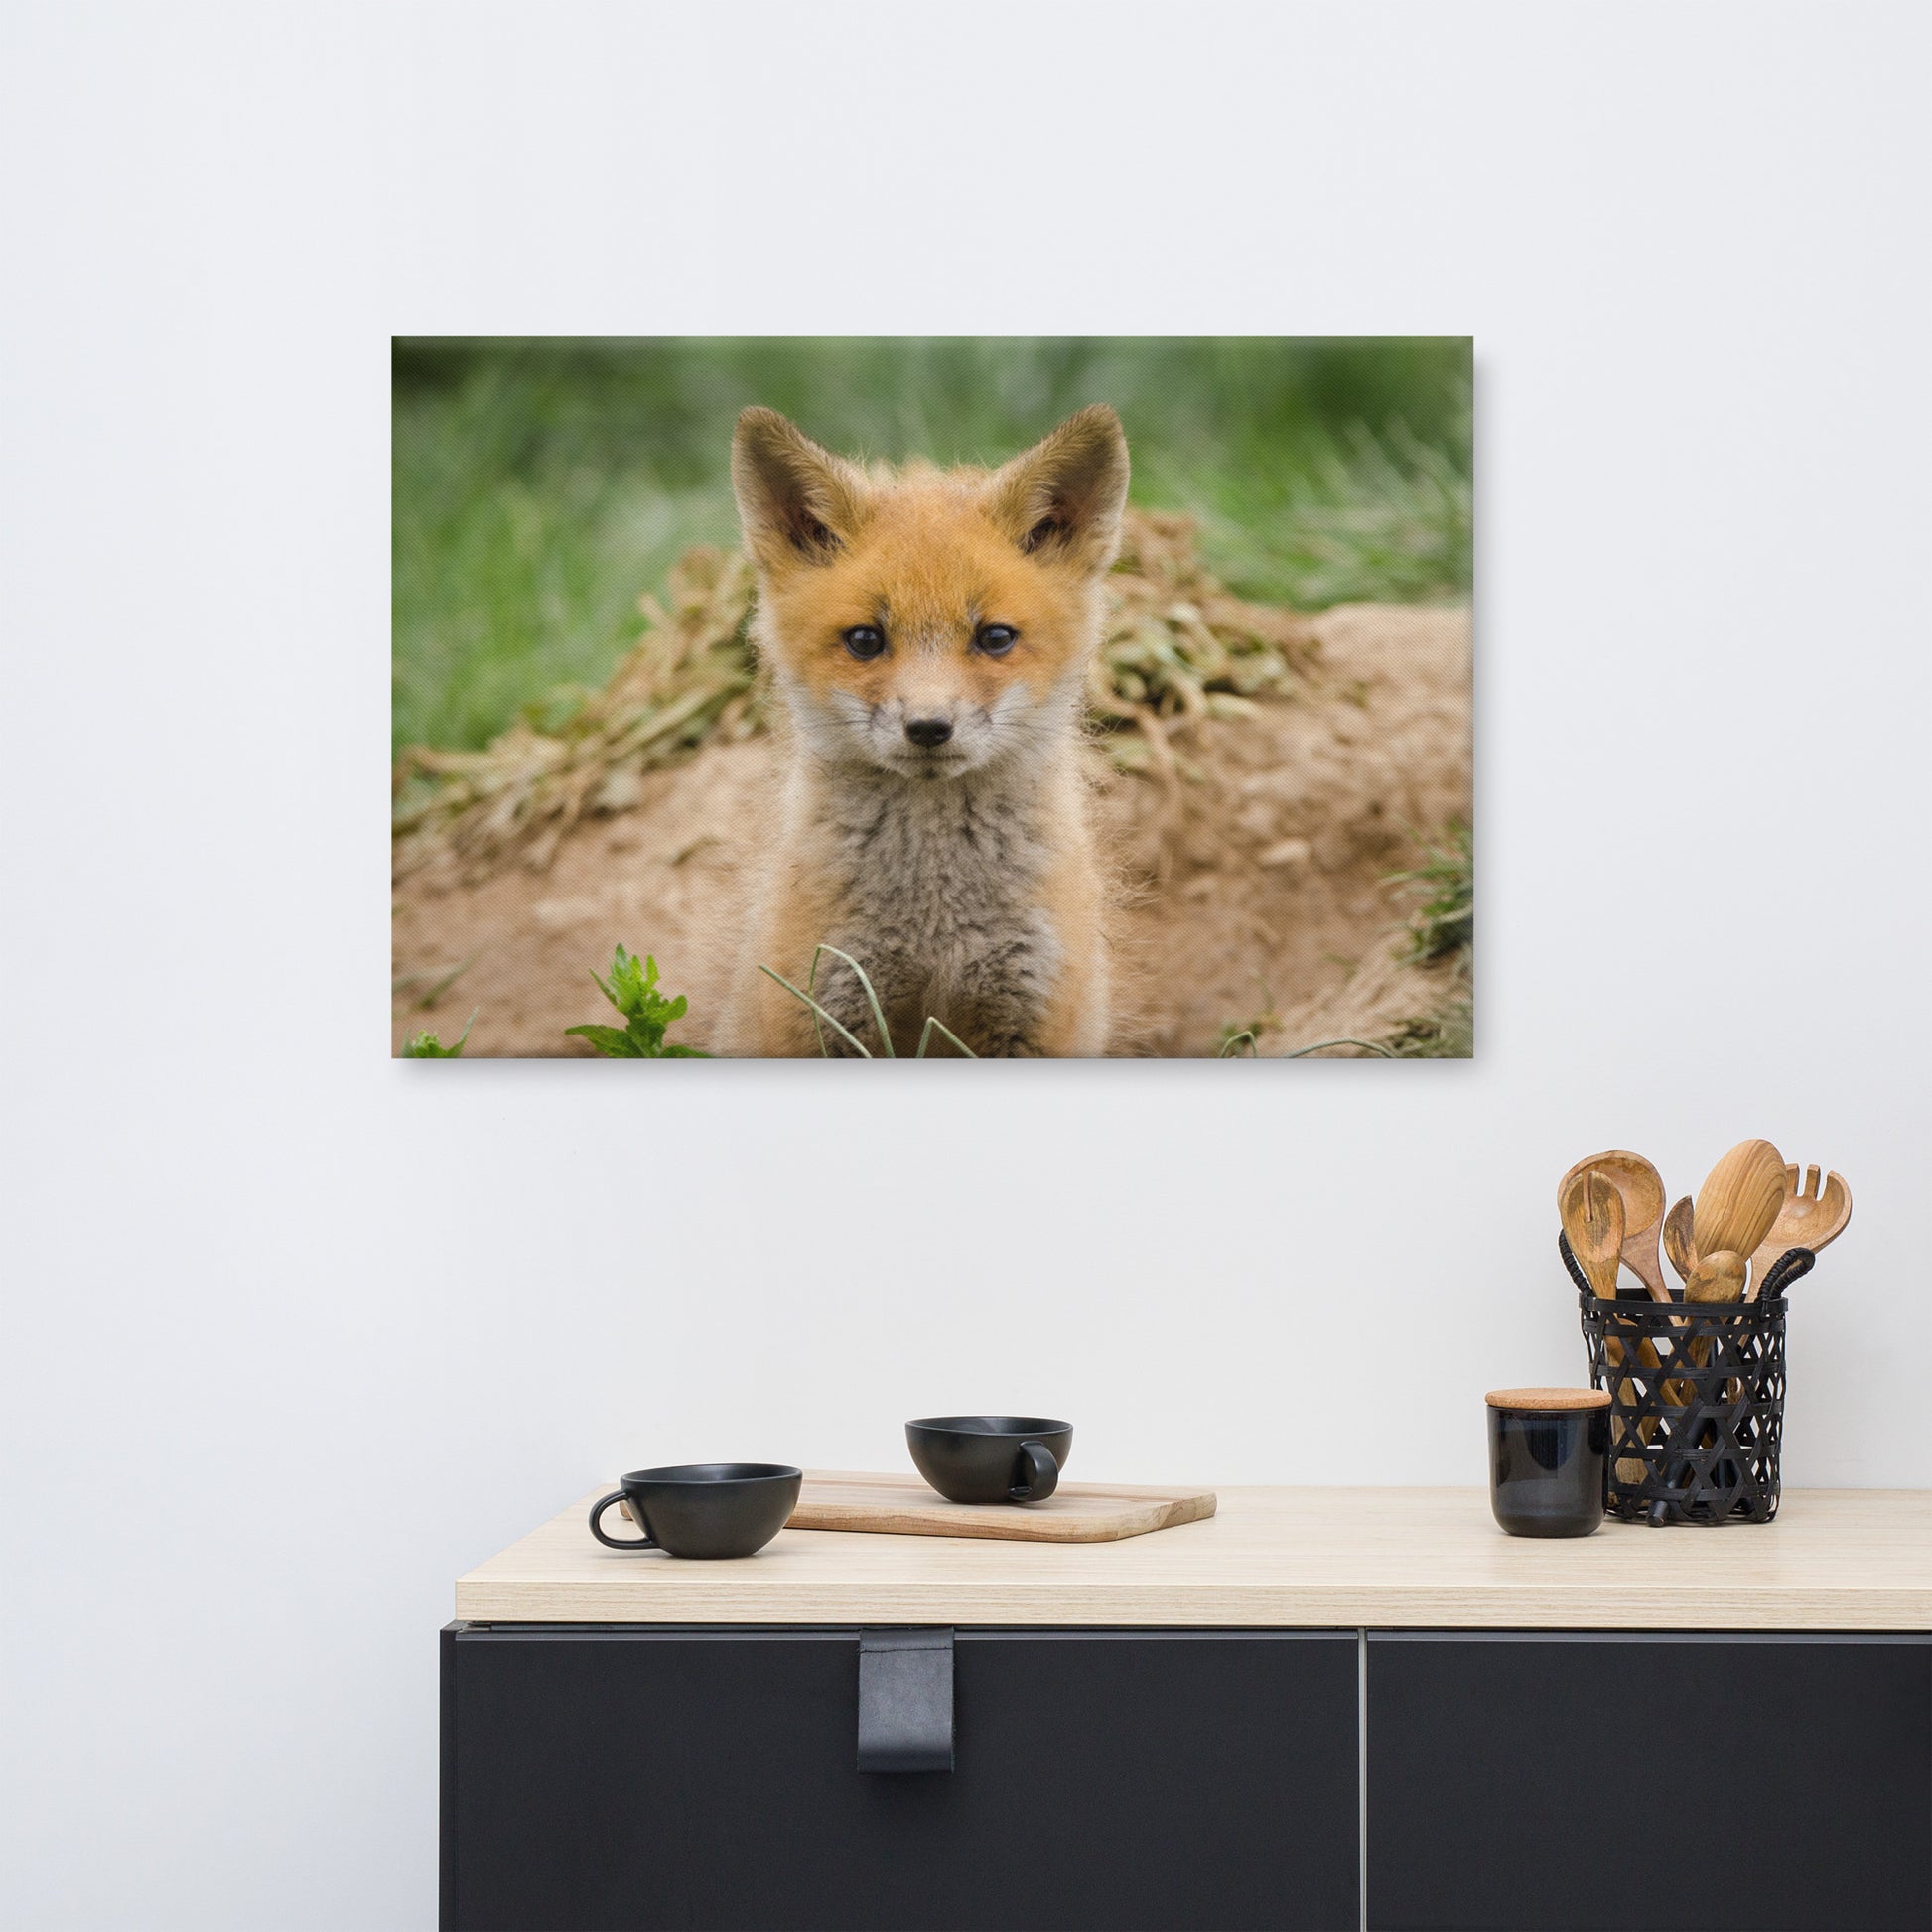 Modern Dining Wall Decor: Young Red Fox Kit Popping Out of Den- Wildlife / Animal / Nature Photograph Canvas Wall Art Print - Artwork